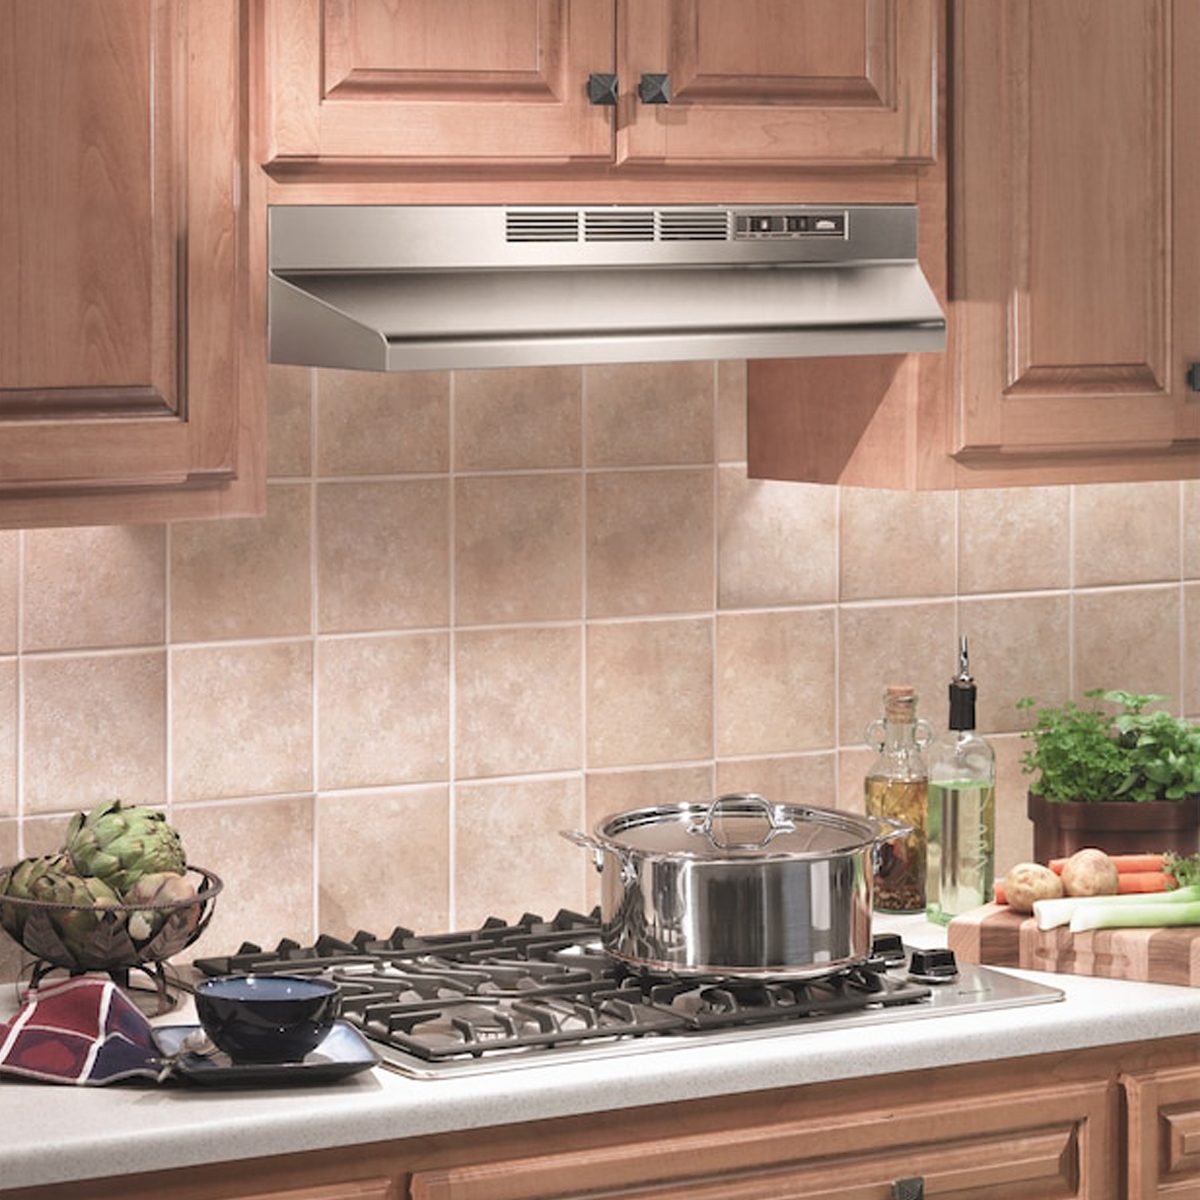 Broan 30 In Ductless Stainless Steel Undercabinet Range Hood With Charcoal Filter Ecomm Lowes.com  ?w=1200